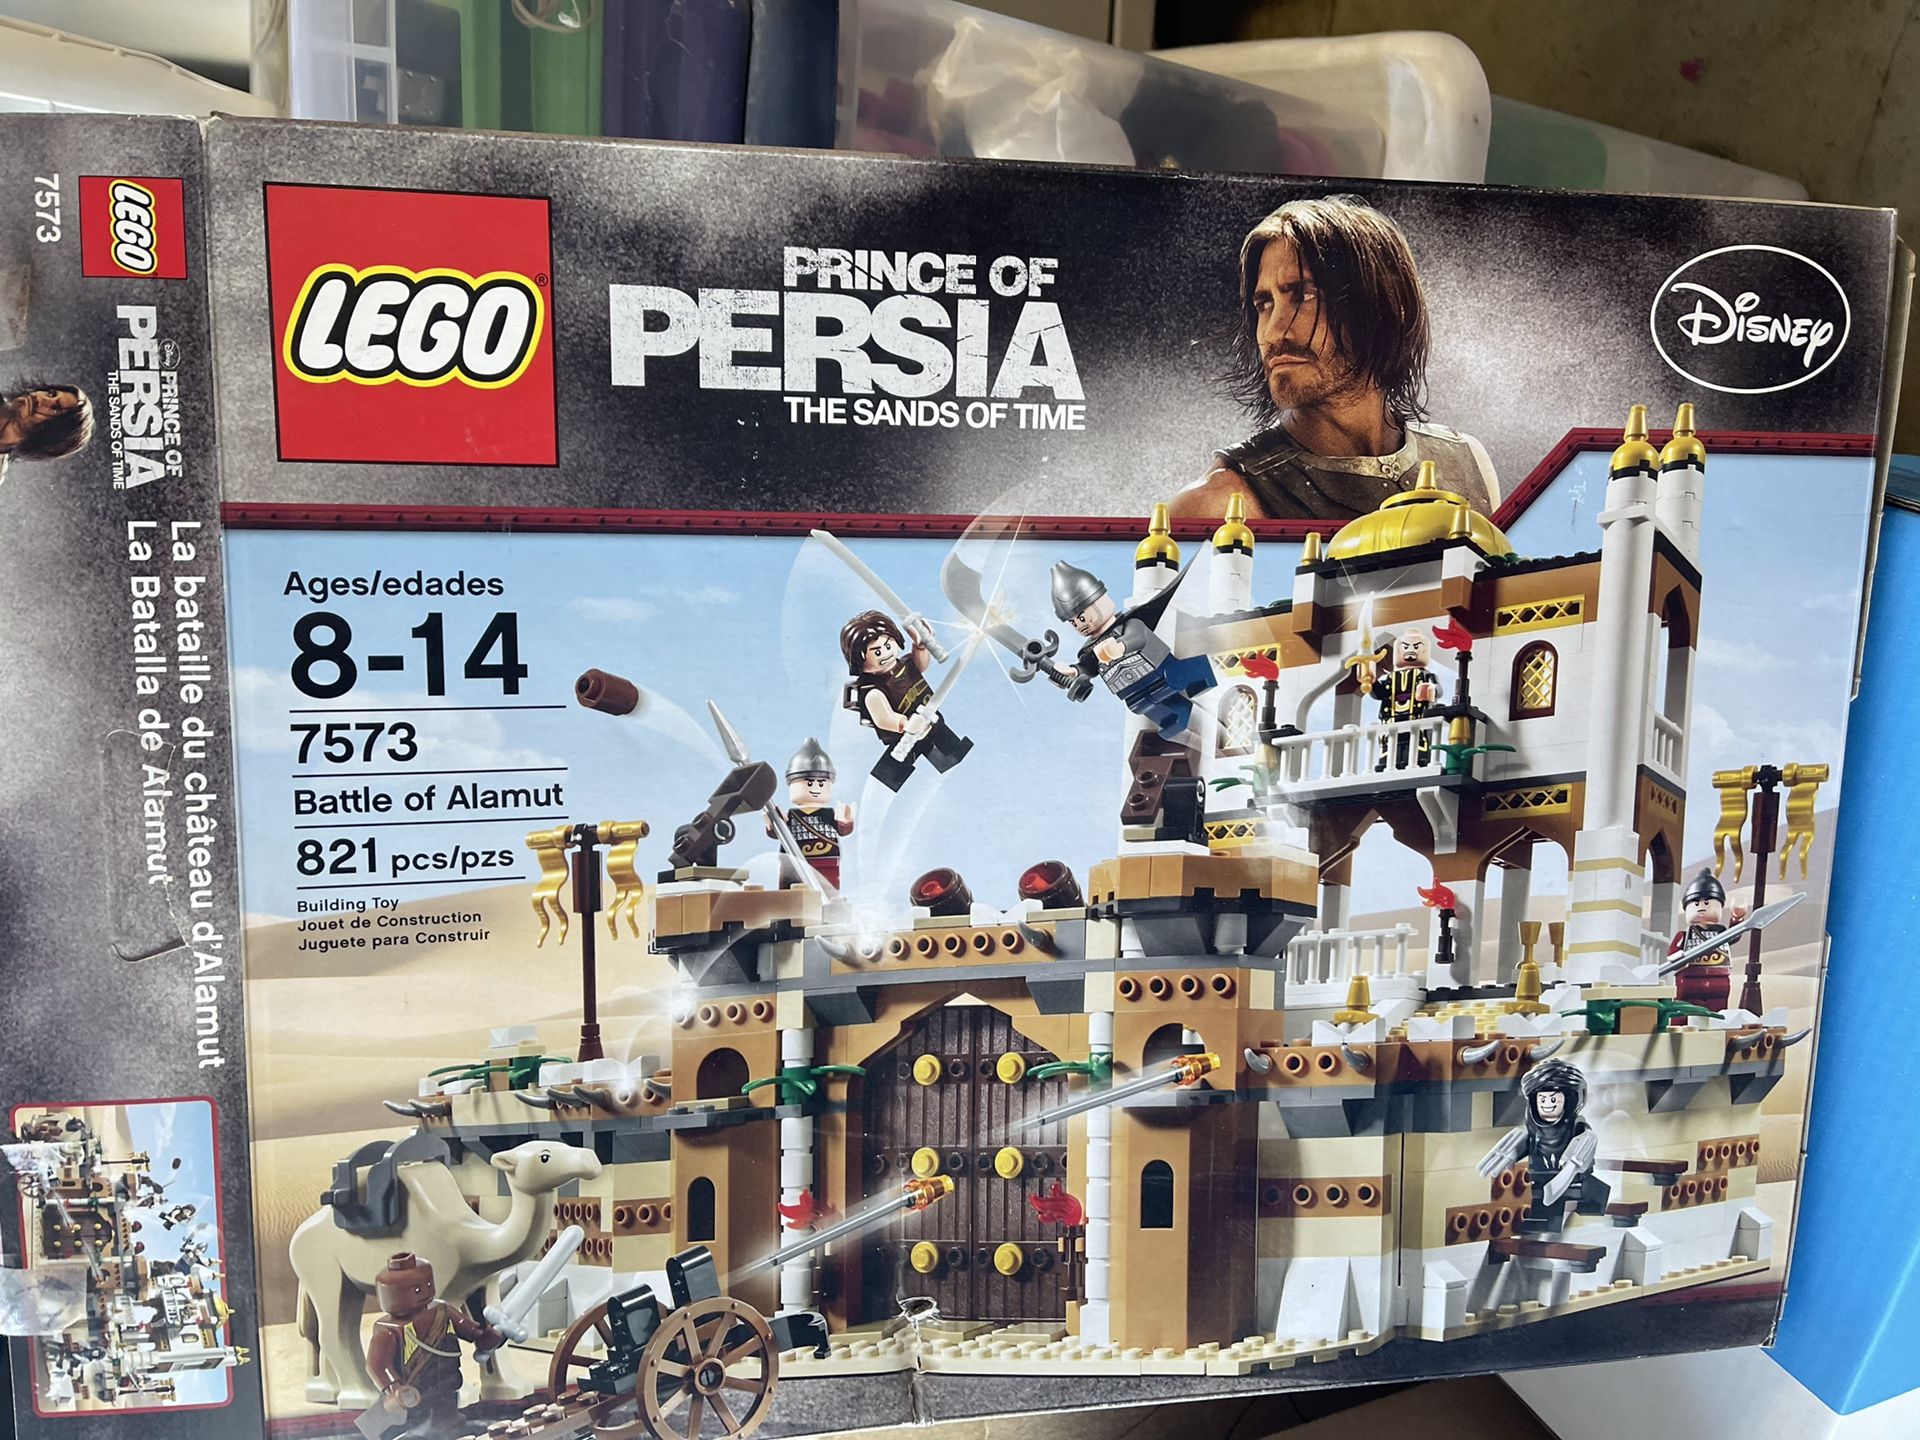 Lego Prince Of Persia Set  Unopened Bags Of Legos Inside 